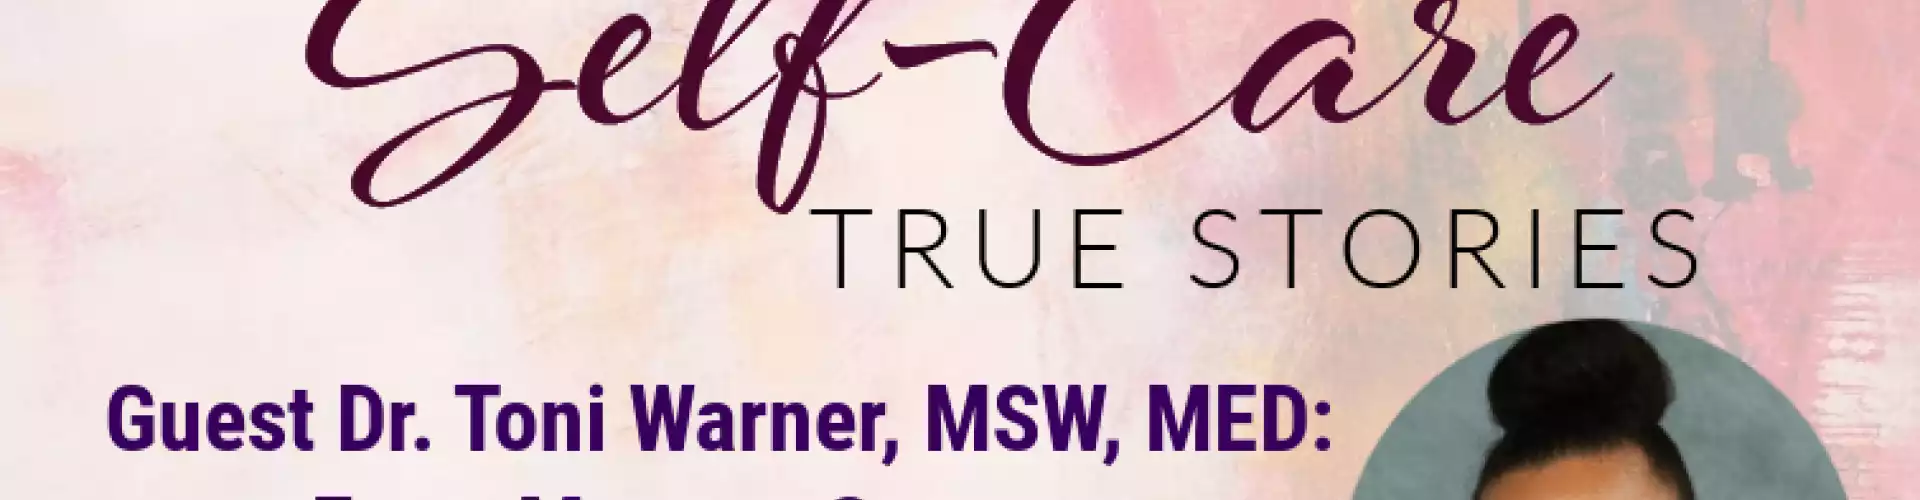 Self-Care True Stories with Guest Dr. Toni Warner: From Mess to Success